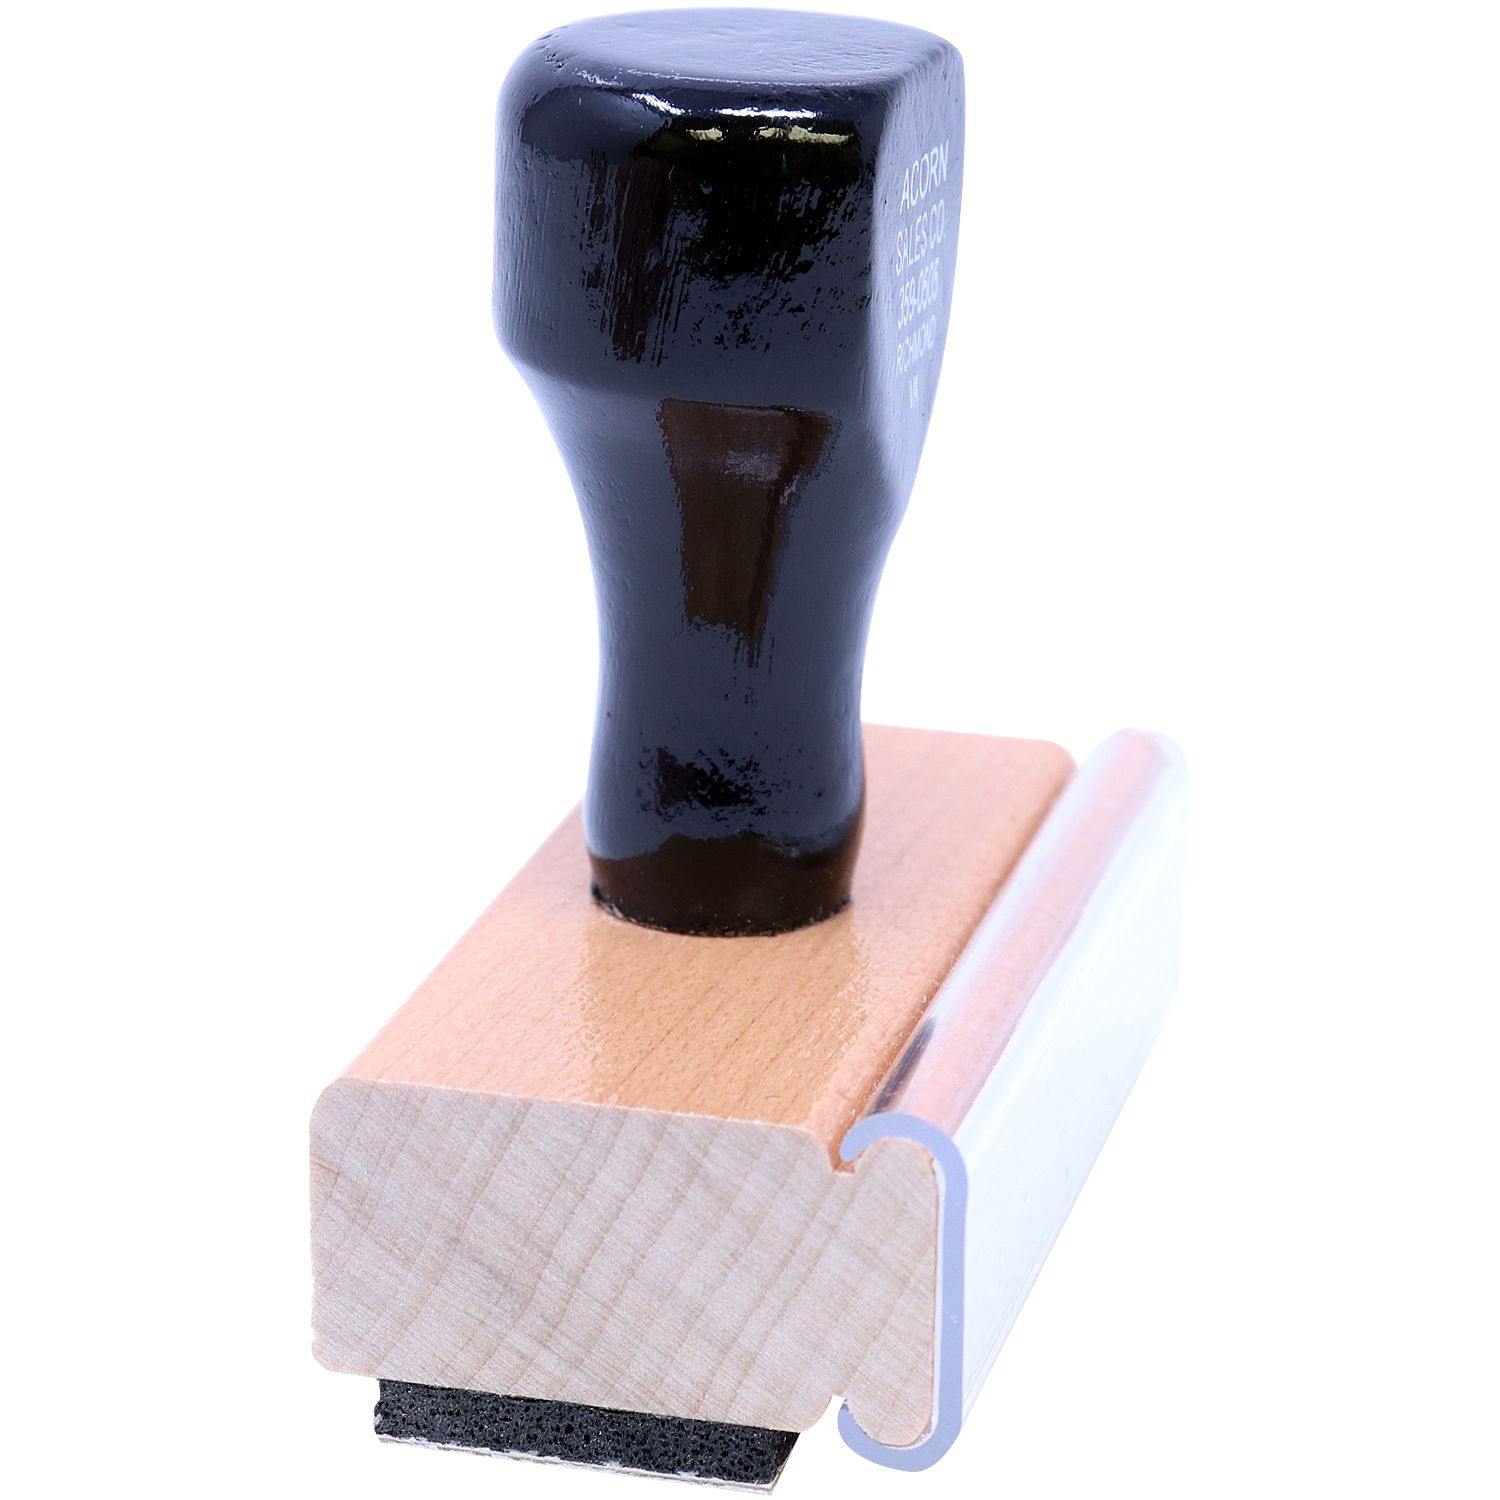 Restricted Delivery Rubber Stamp - Engineer Seal Stamps - Brand_Acorn, Impression Size_Small, Stamp Type_Regular Stamp, Type of Use_Postal & Mailing, Type of Use_Shipping & Receiving